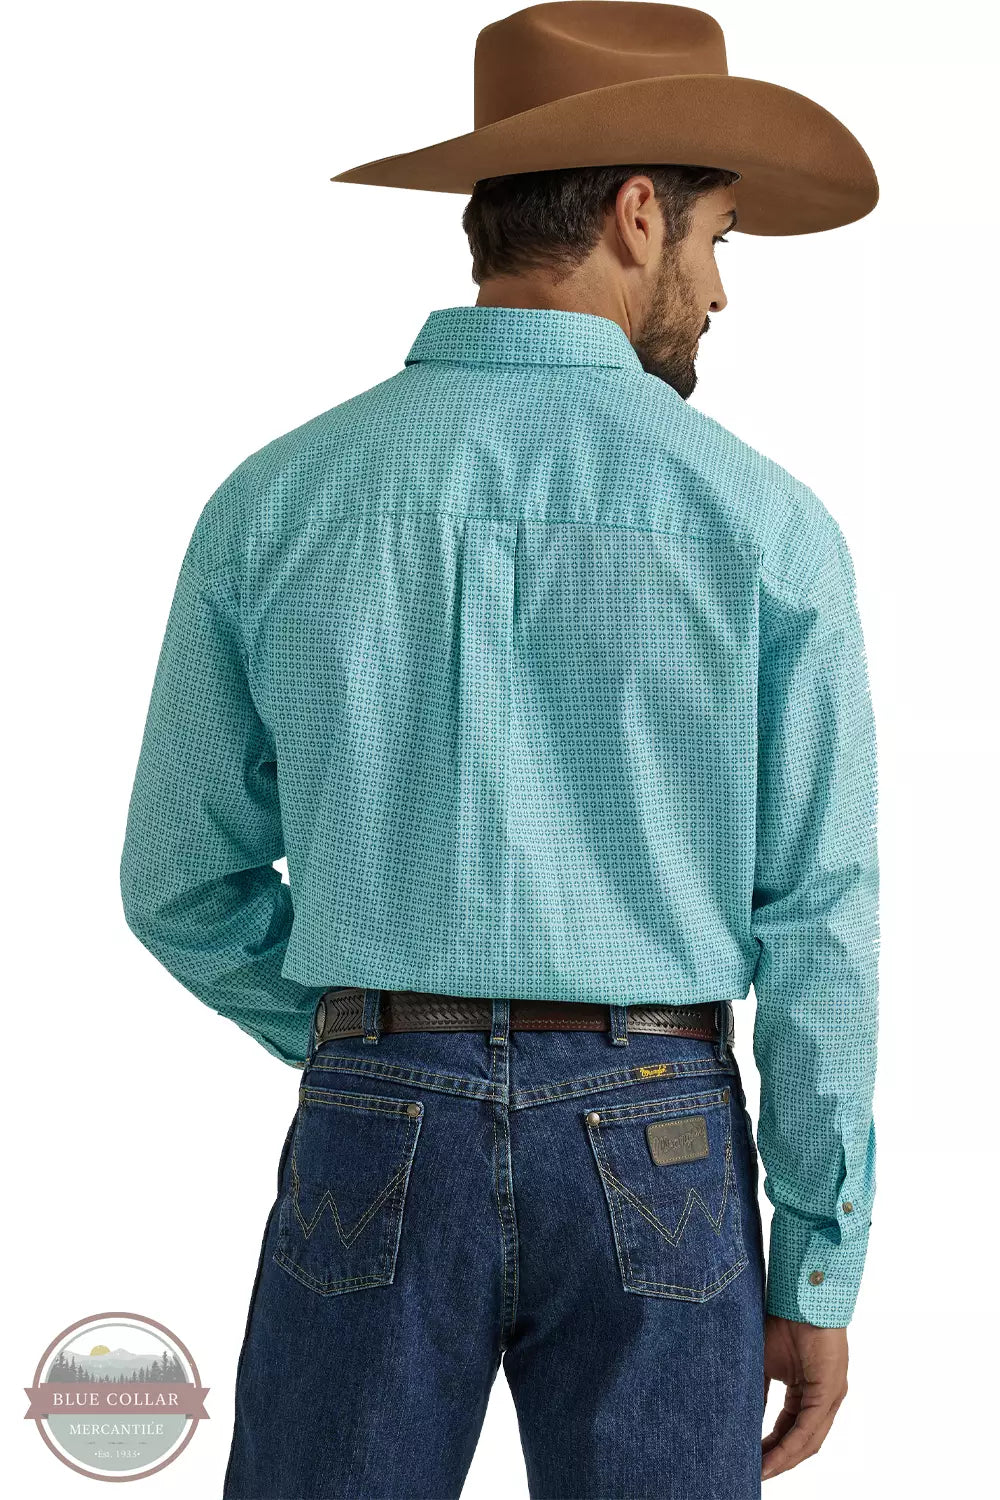 Wrangler 112338103 George Strait Long Sleeve One Pocket Button Down Shirt in Teal Print Back View